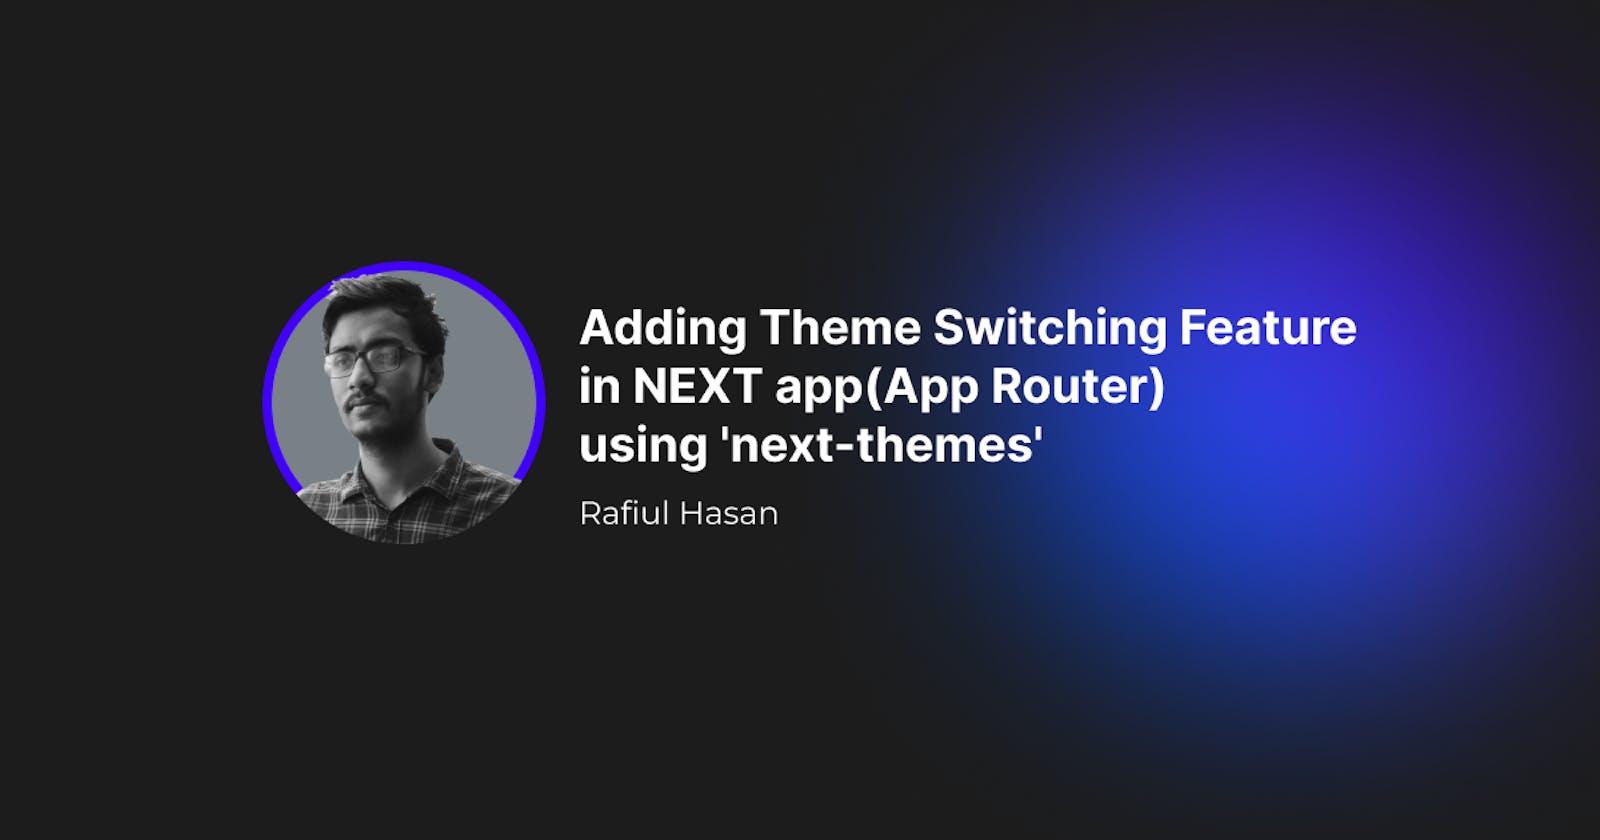 Adding Theme Switching Feature in NEXT app (App Router) using 'next-themes'